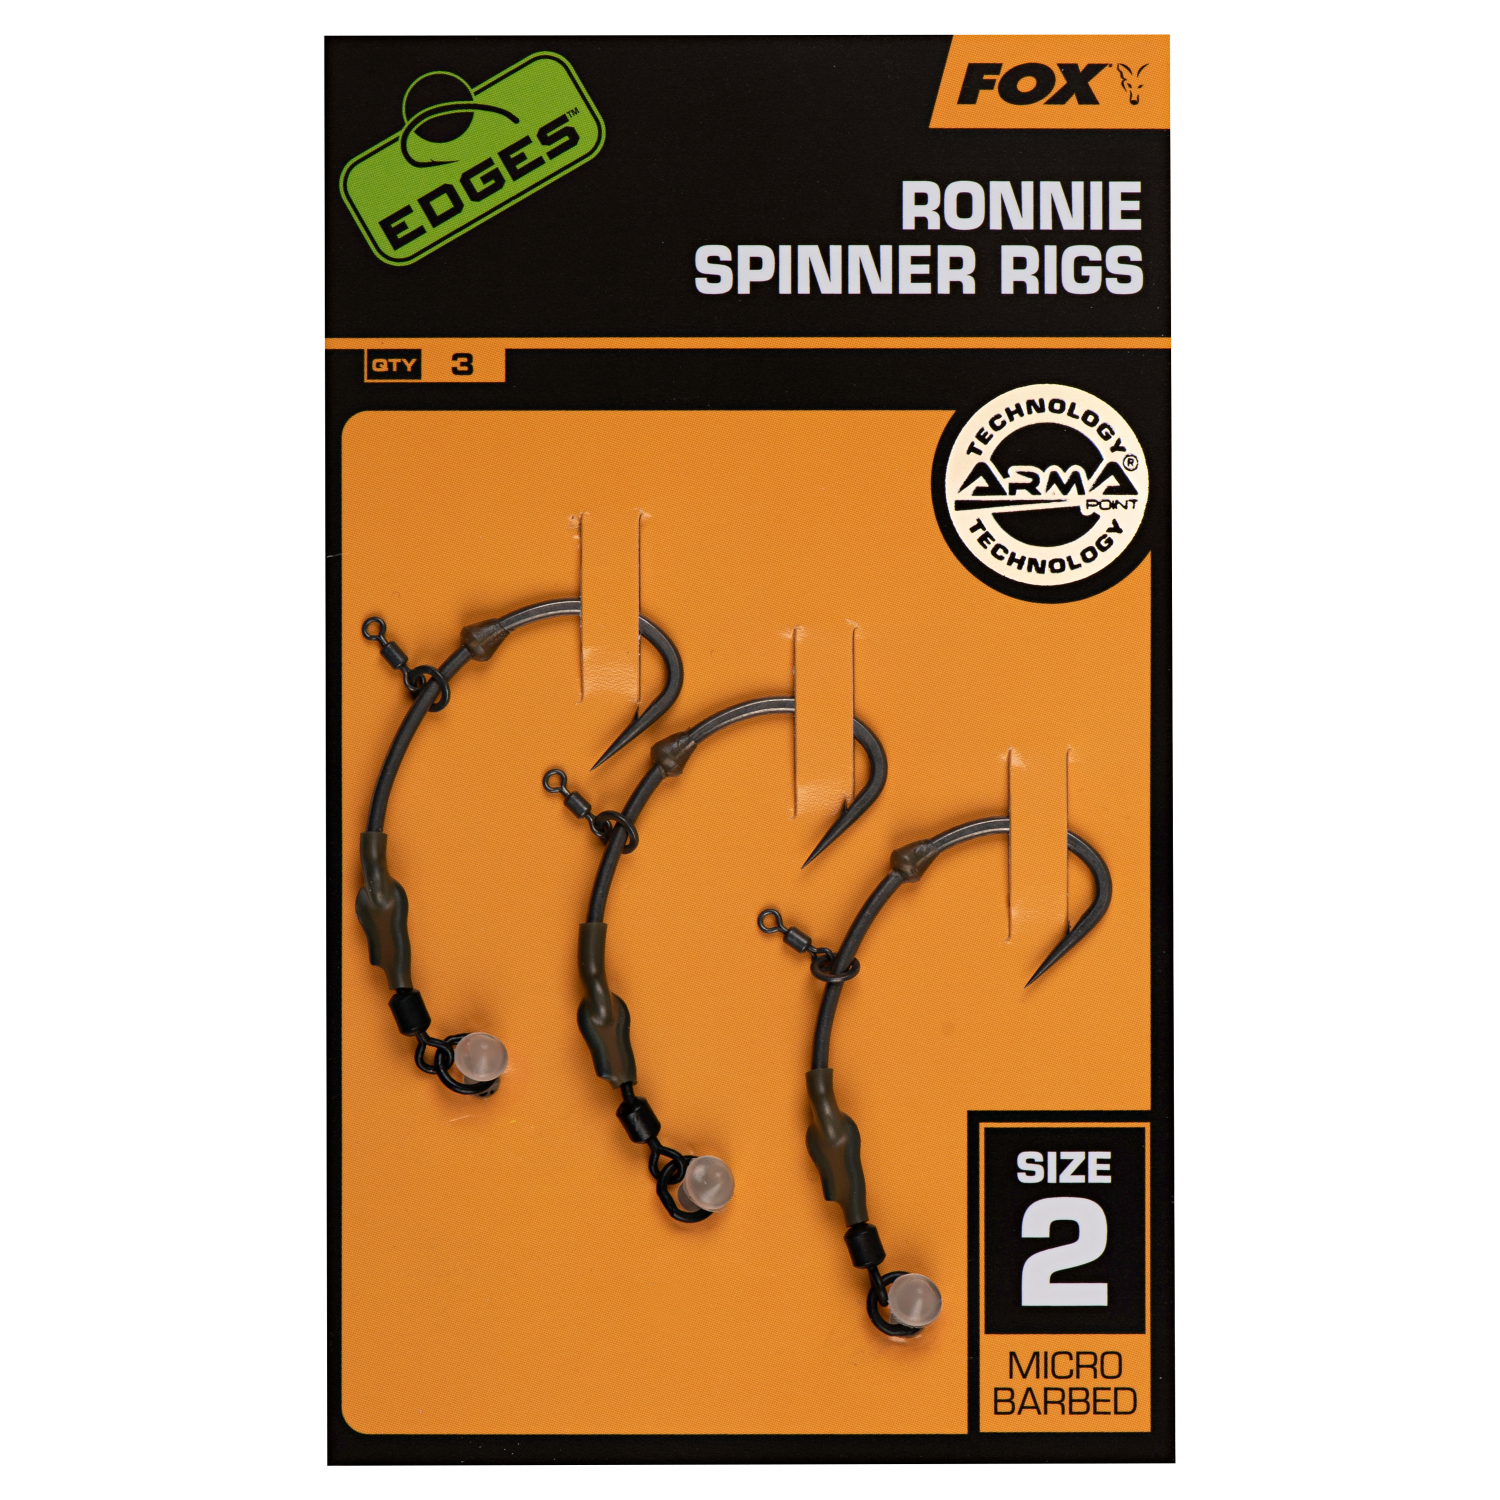 Fox Carp Eges Ronnie Spinner Rigs Medium Curve at low prices